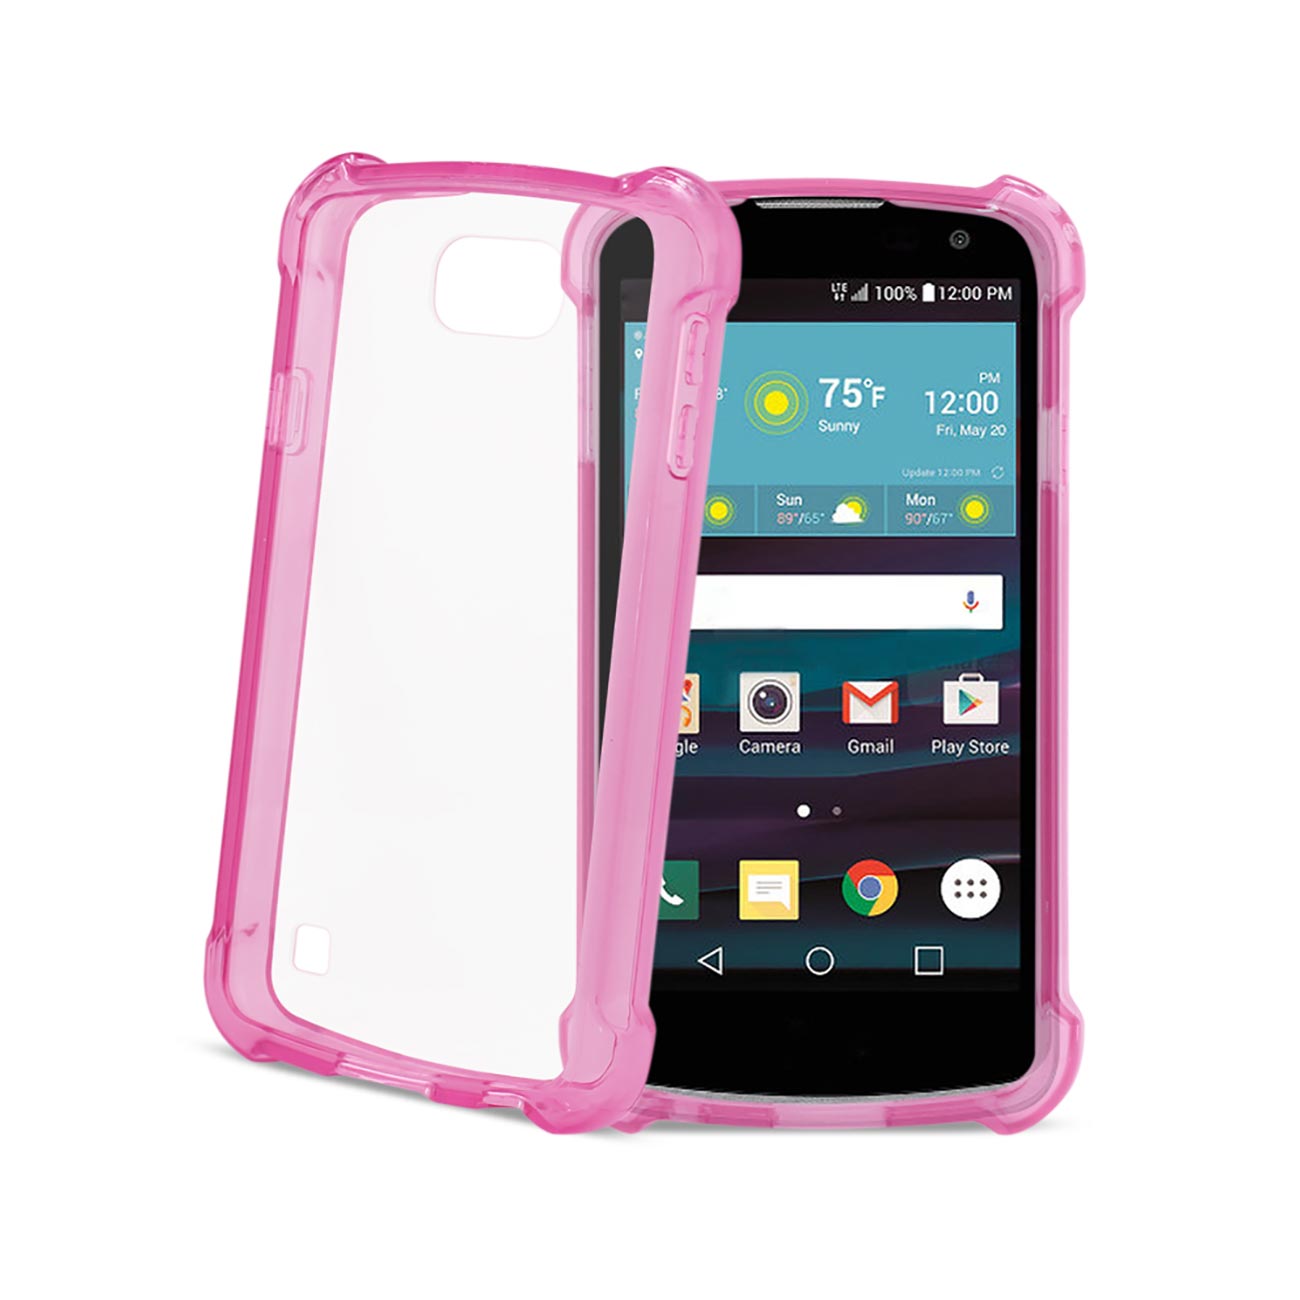 Case Clear Bumper Air Cushion Protection LG Spree Clear Hot Pink Color